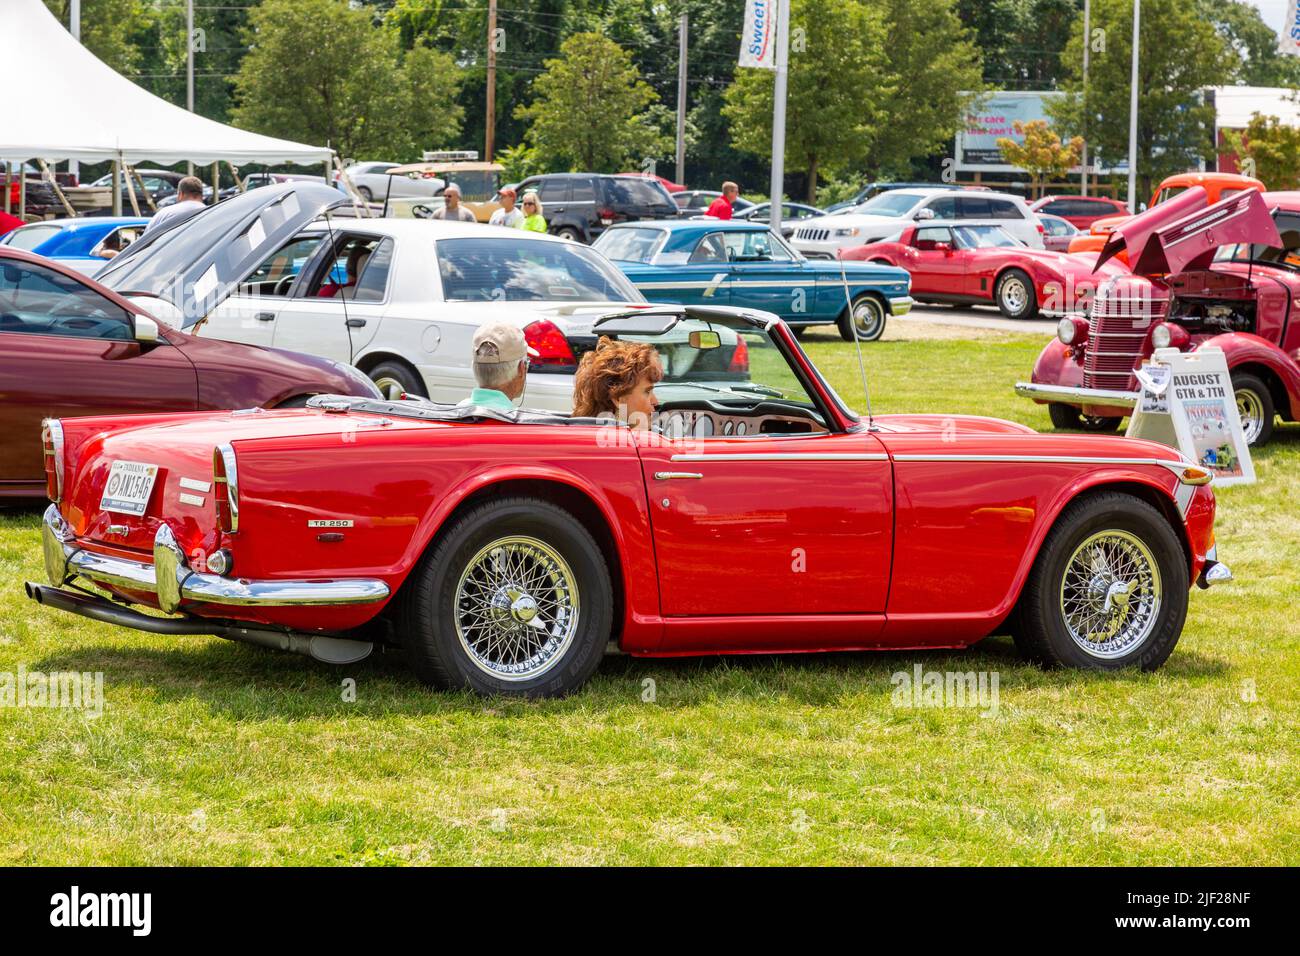 A red 1968 Triumph TR 250 convertible sports car at a car show in Fort Wayne, Indiana, USA. Stock Photo